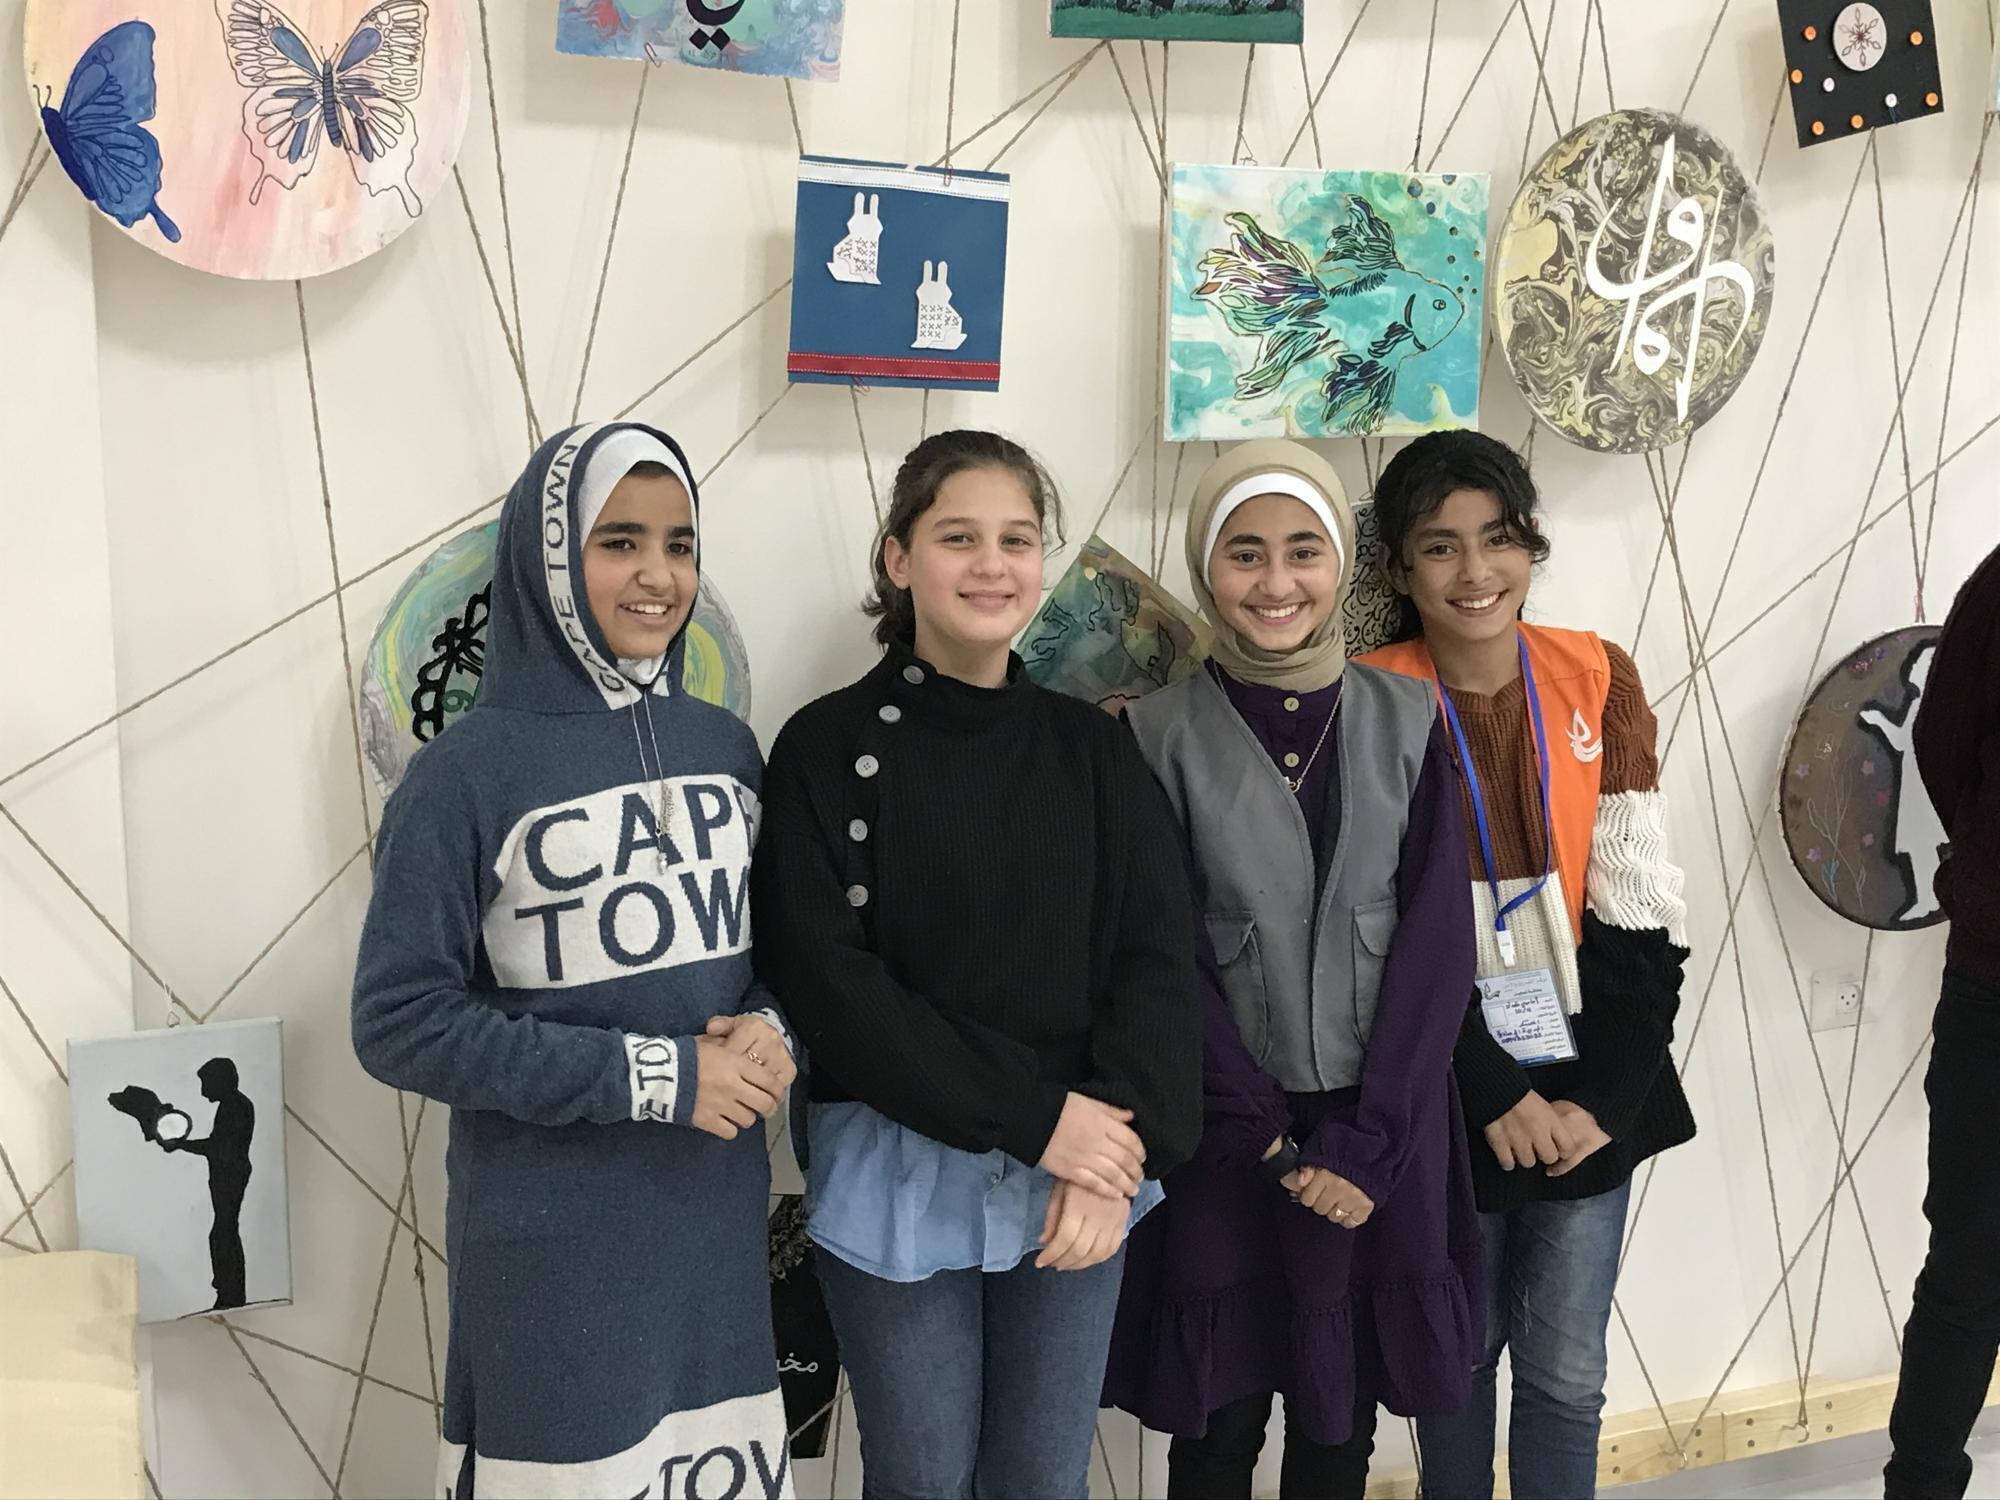 A group of young girls in Gaza